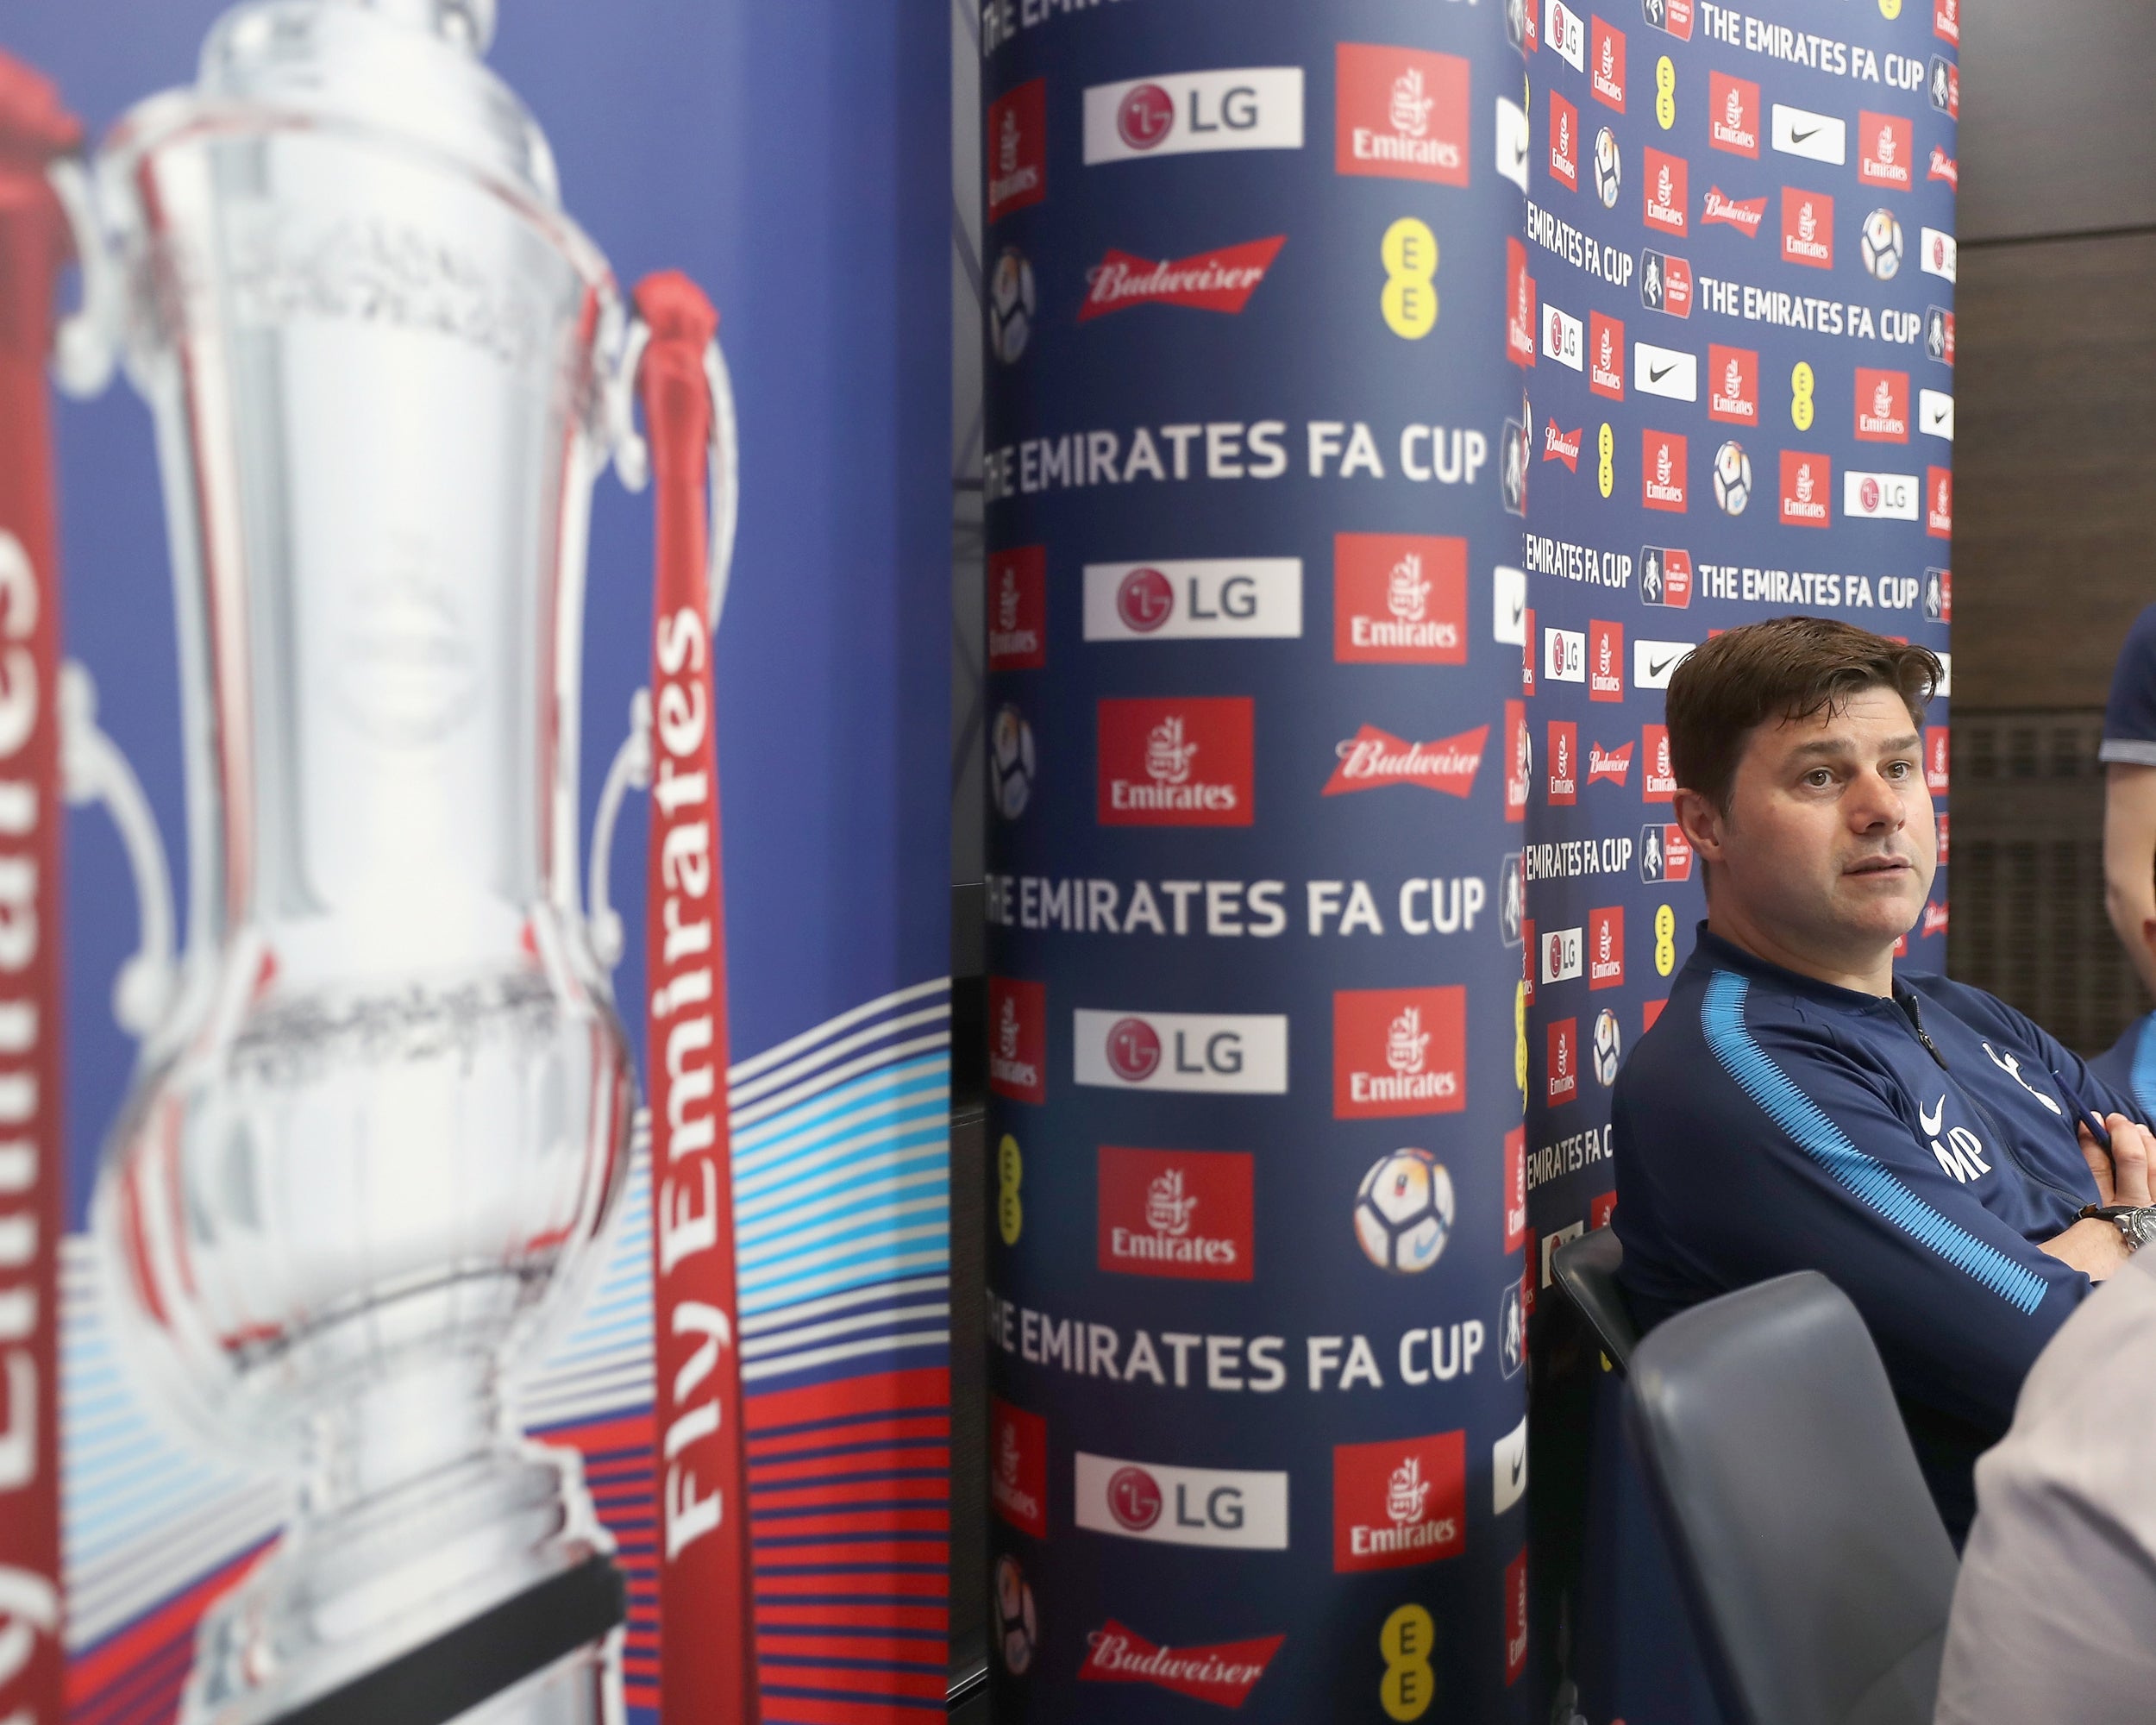 Mauricio Pochettino reiterates his belief that FA Cup success not the be-all and end-all for Tottenham